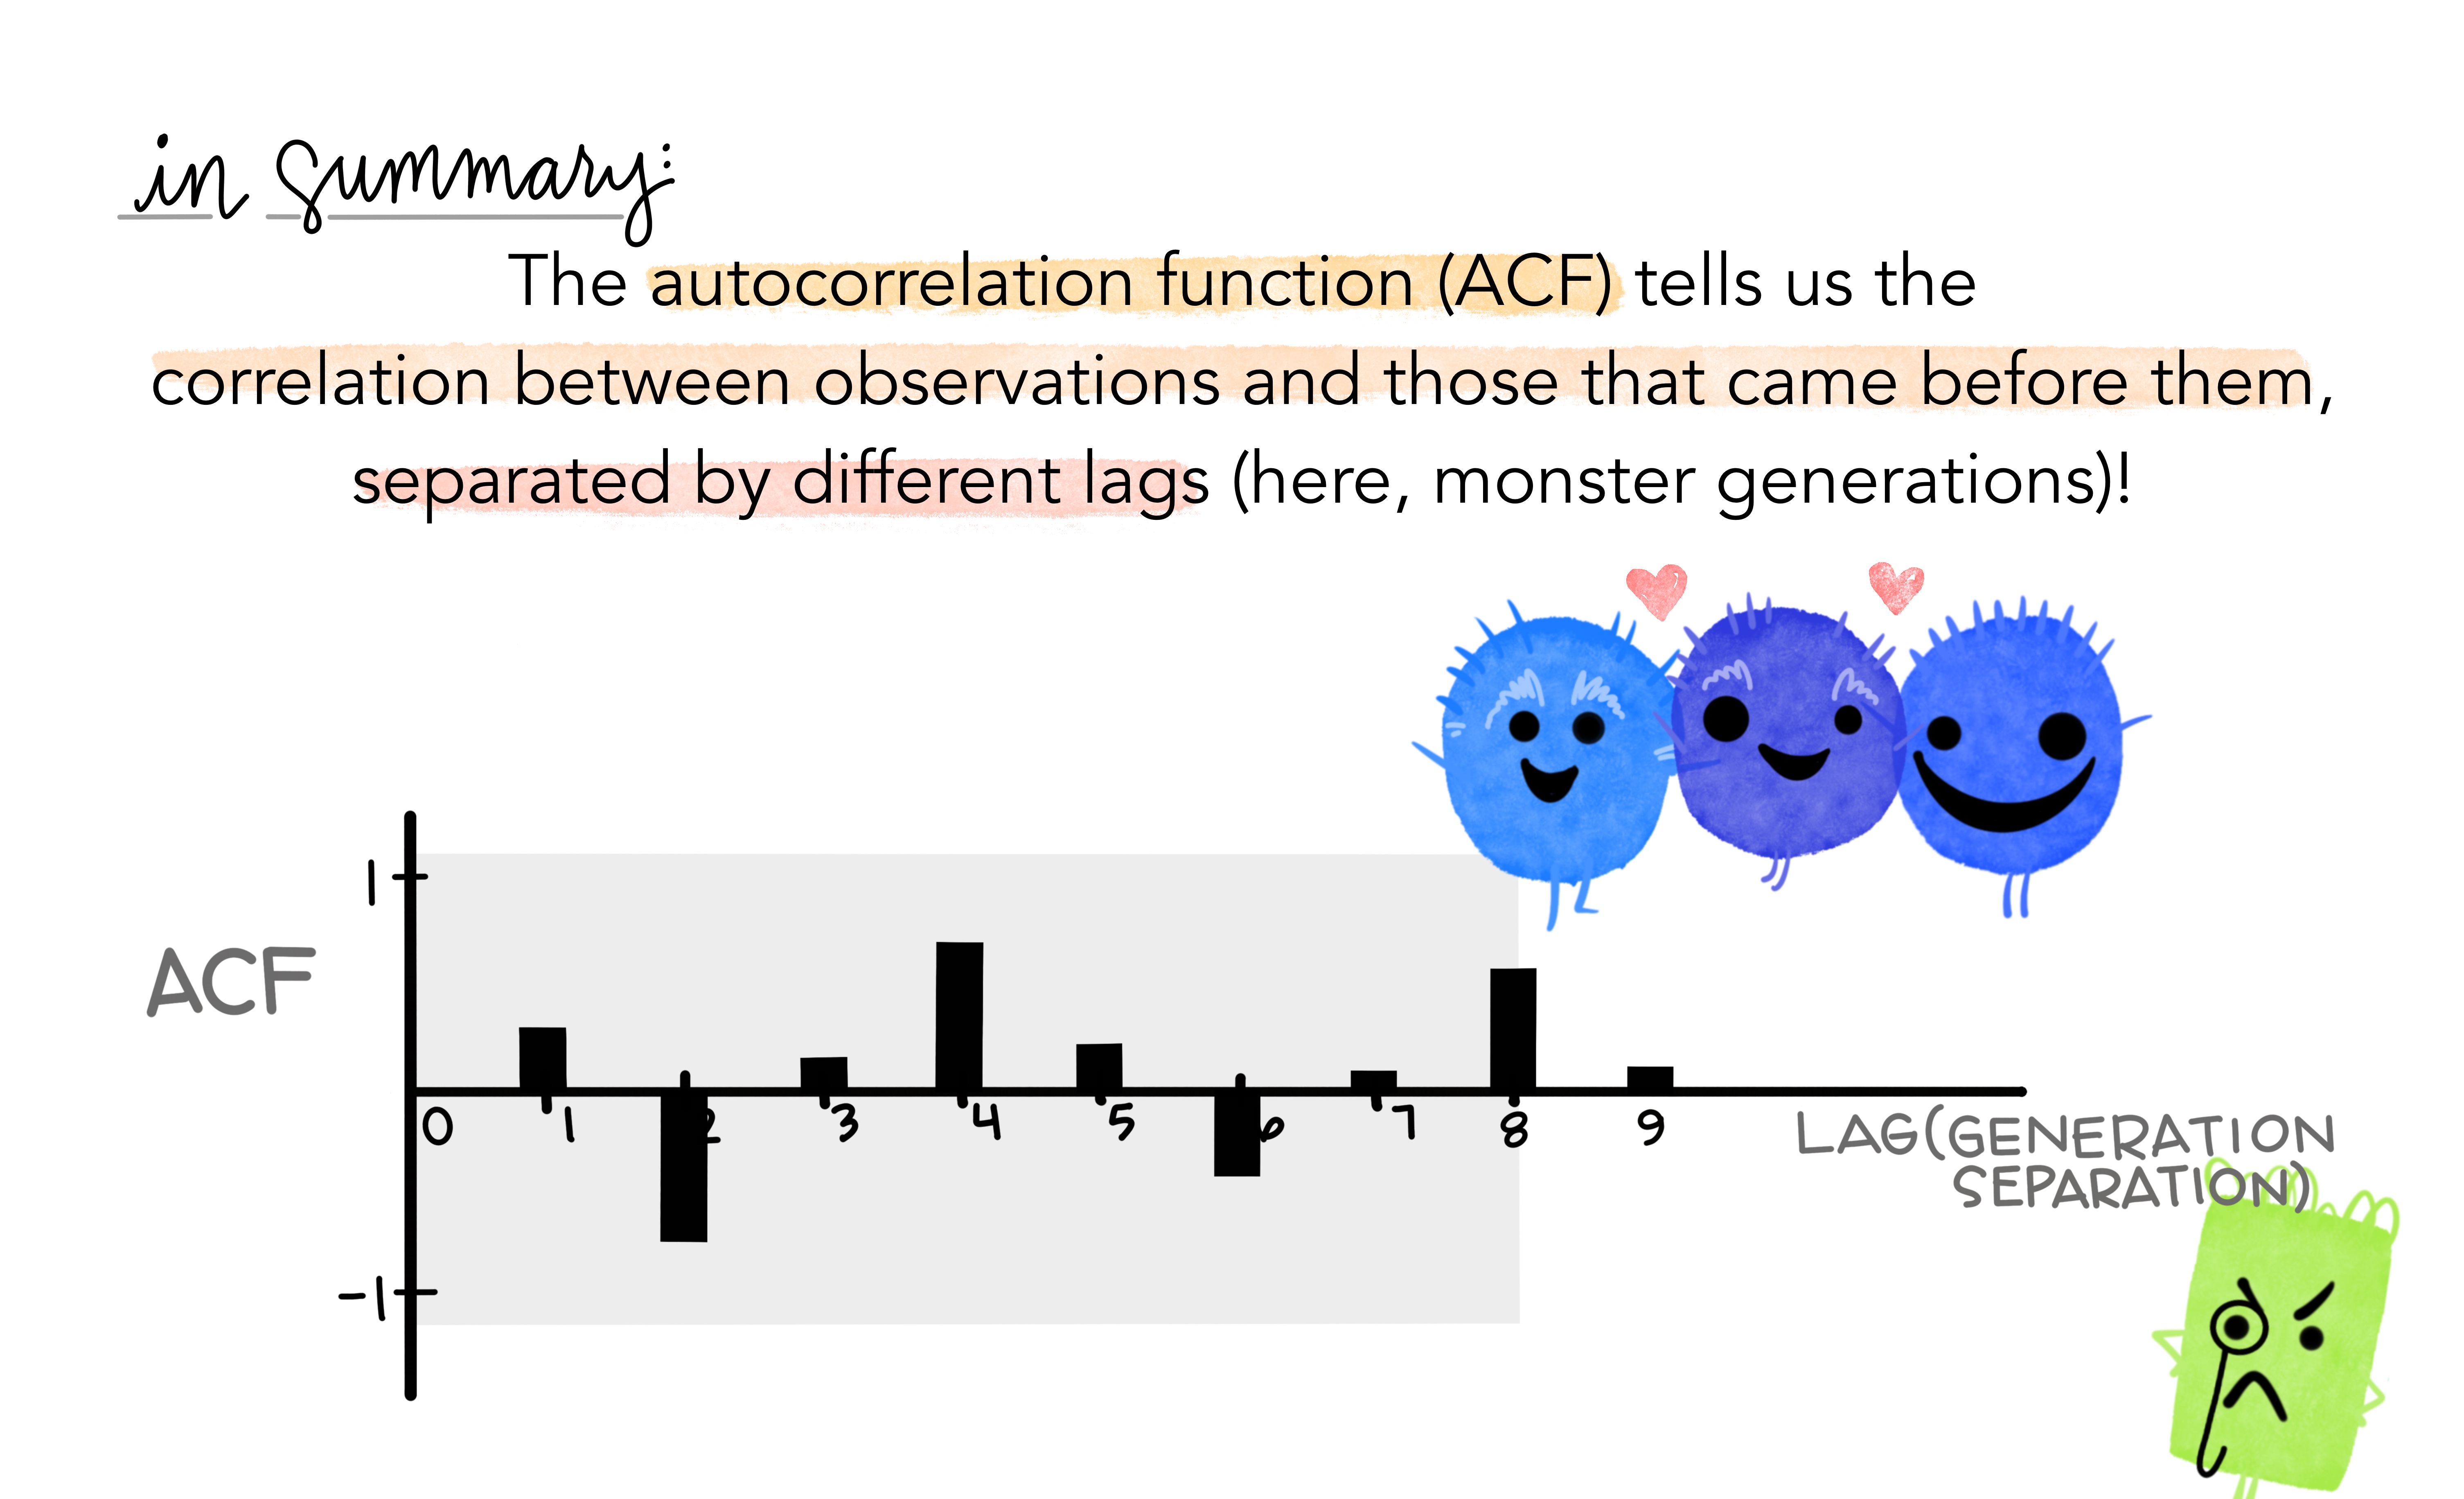 Three very similar blue round monsters standing next to each other, looking very happy and with little hearts between them, representing monsters separated by 4 generations (so they are very similar). There is an example ACF function below them showing positive correlations at lag = 4 and 8. Text reads “In summary: the autocorrelation function (ACF) tells us the correlation between observations and those that came before them, separated by different lags (here, monster generations)!